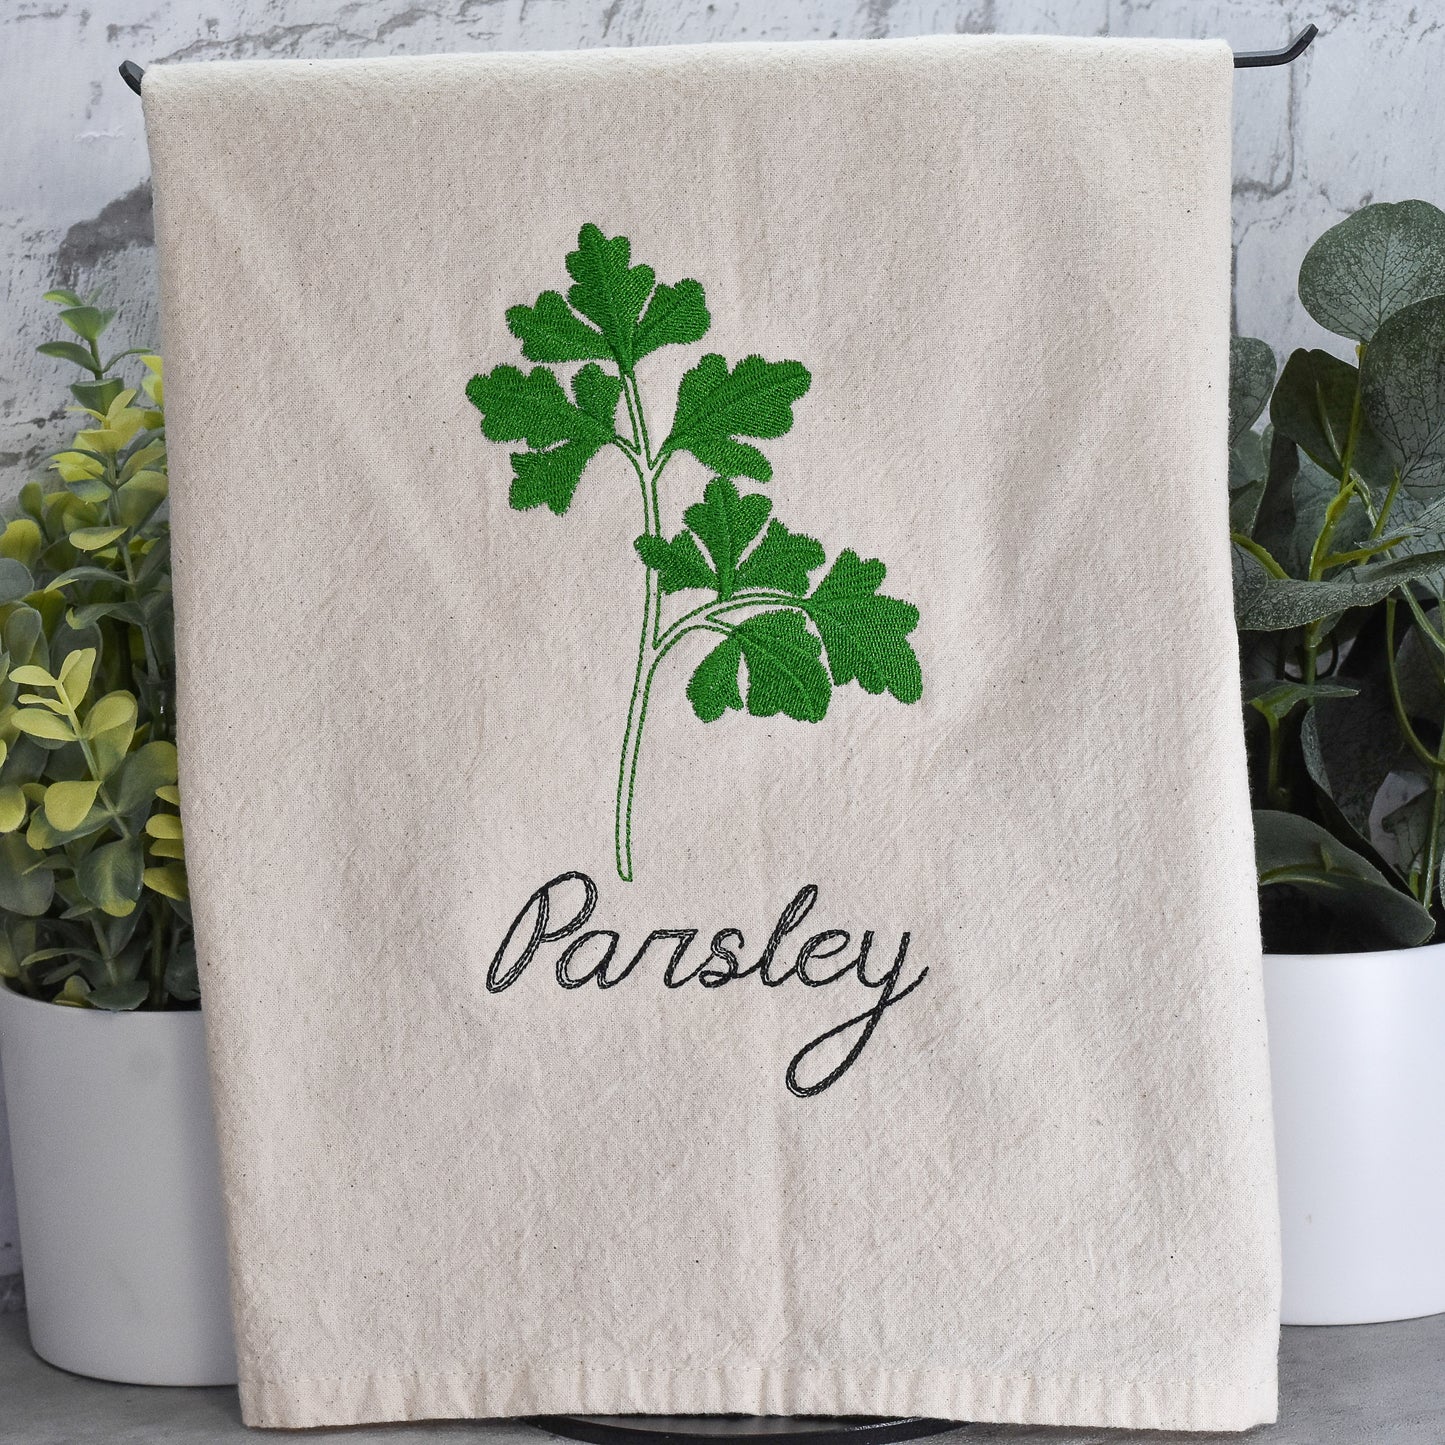 Parsley Herb Collection - Embroidered Flour Sack Towel